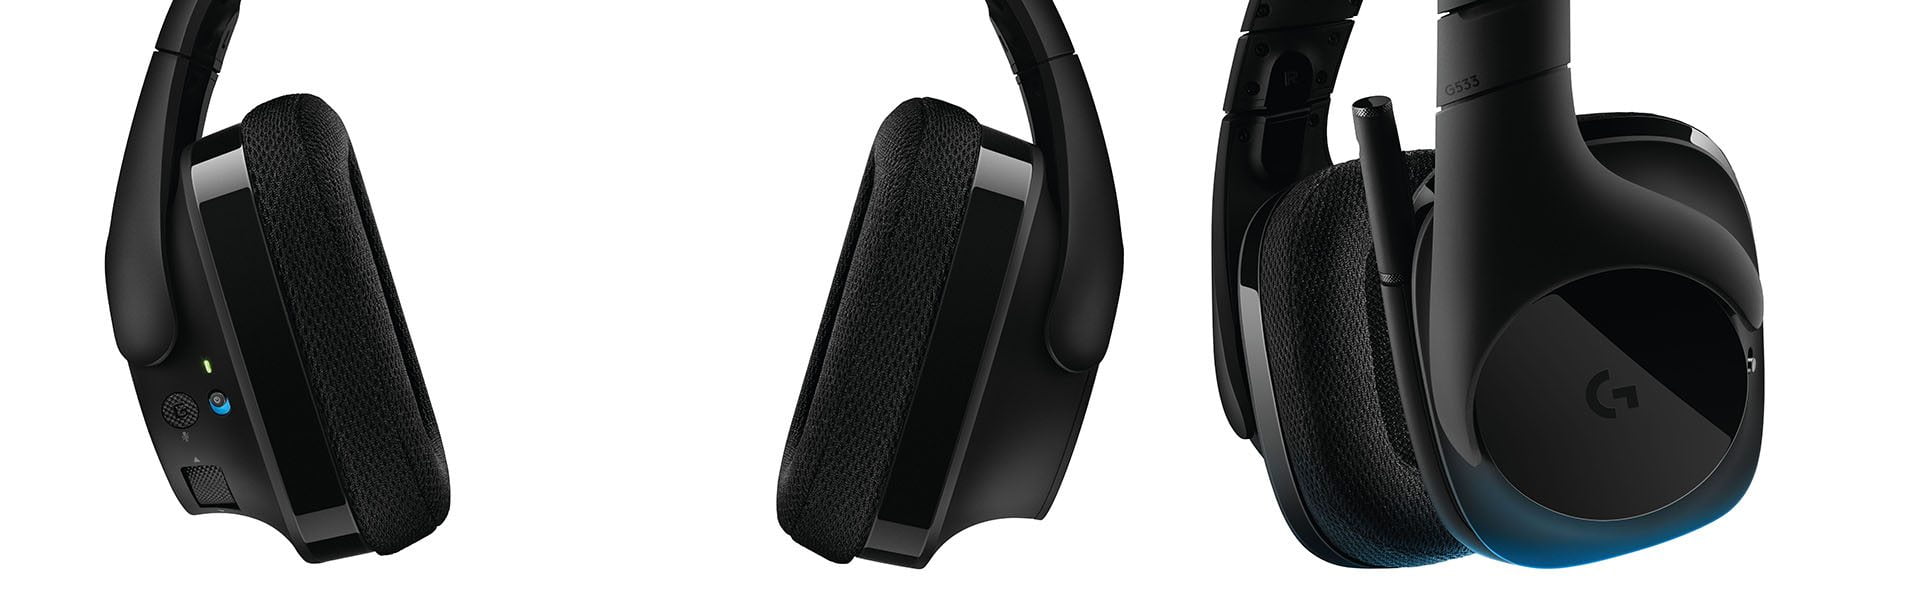 Logitech G Introduces New PC Wireless Gaming Headset 18